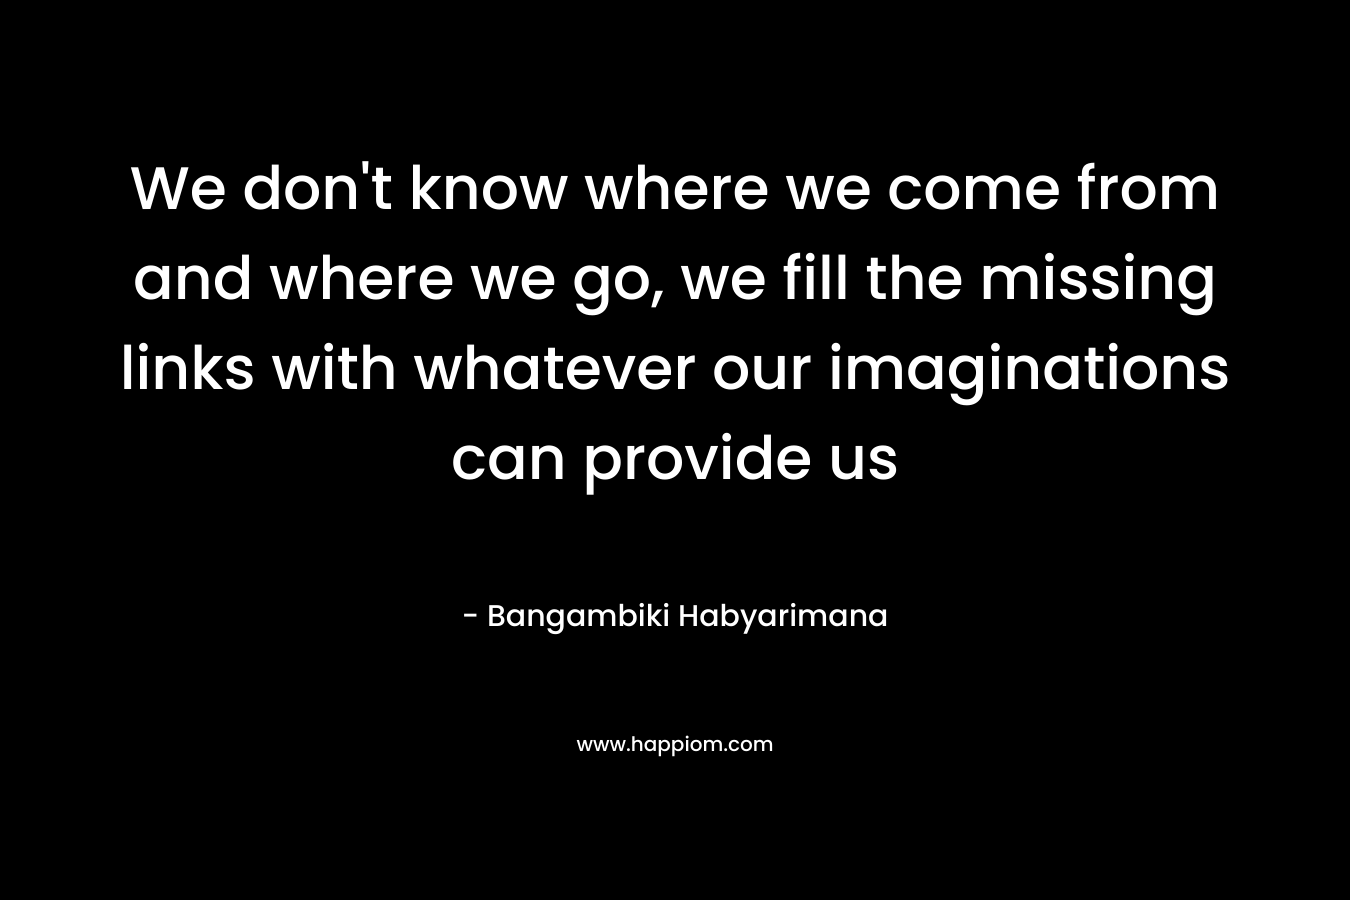 We don’t know where we come from and where we go, we fill the missing links with whatever our imaginations can provide us – Bangambiki Habyarimana